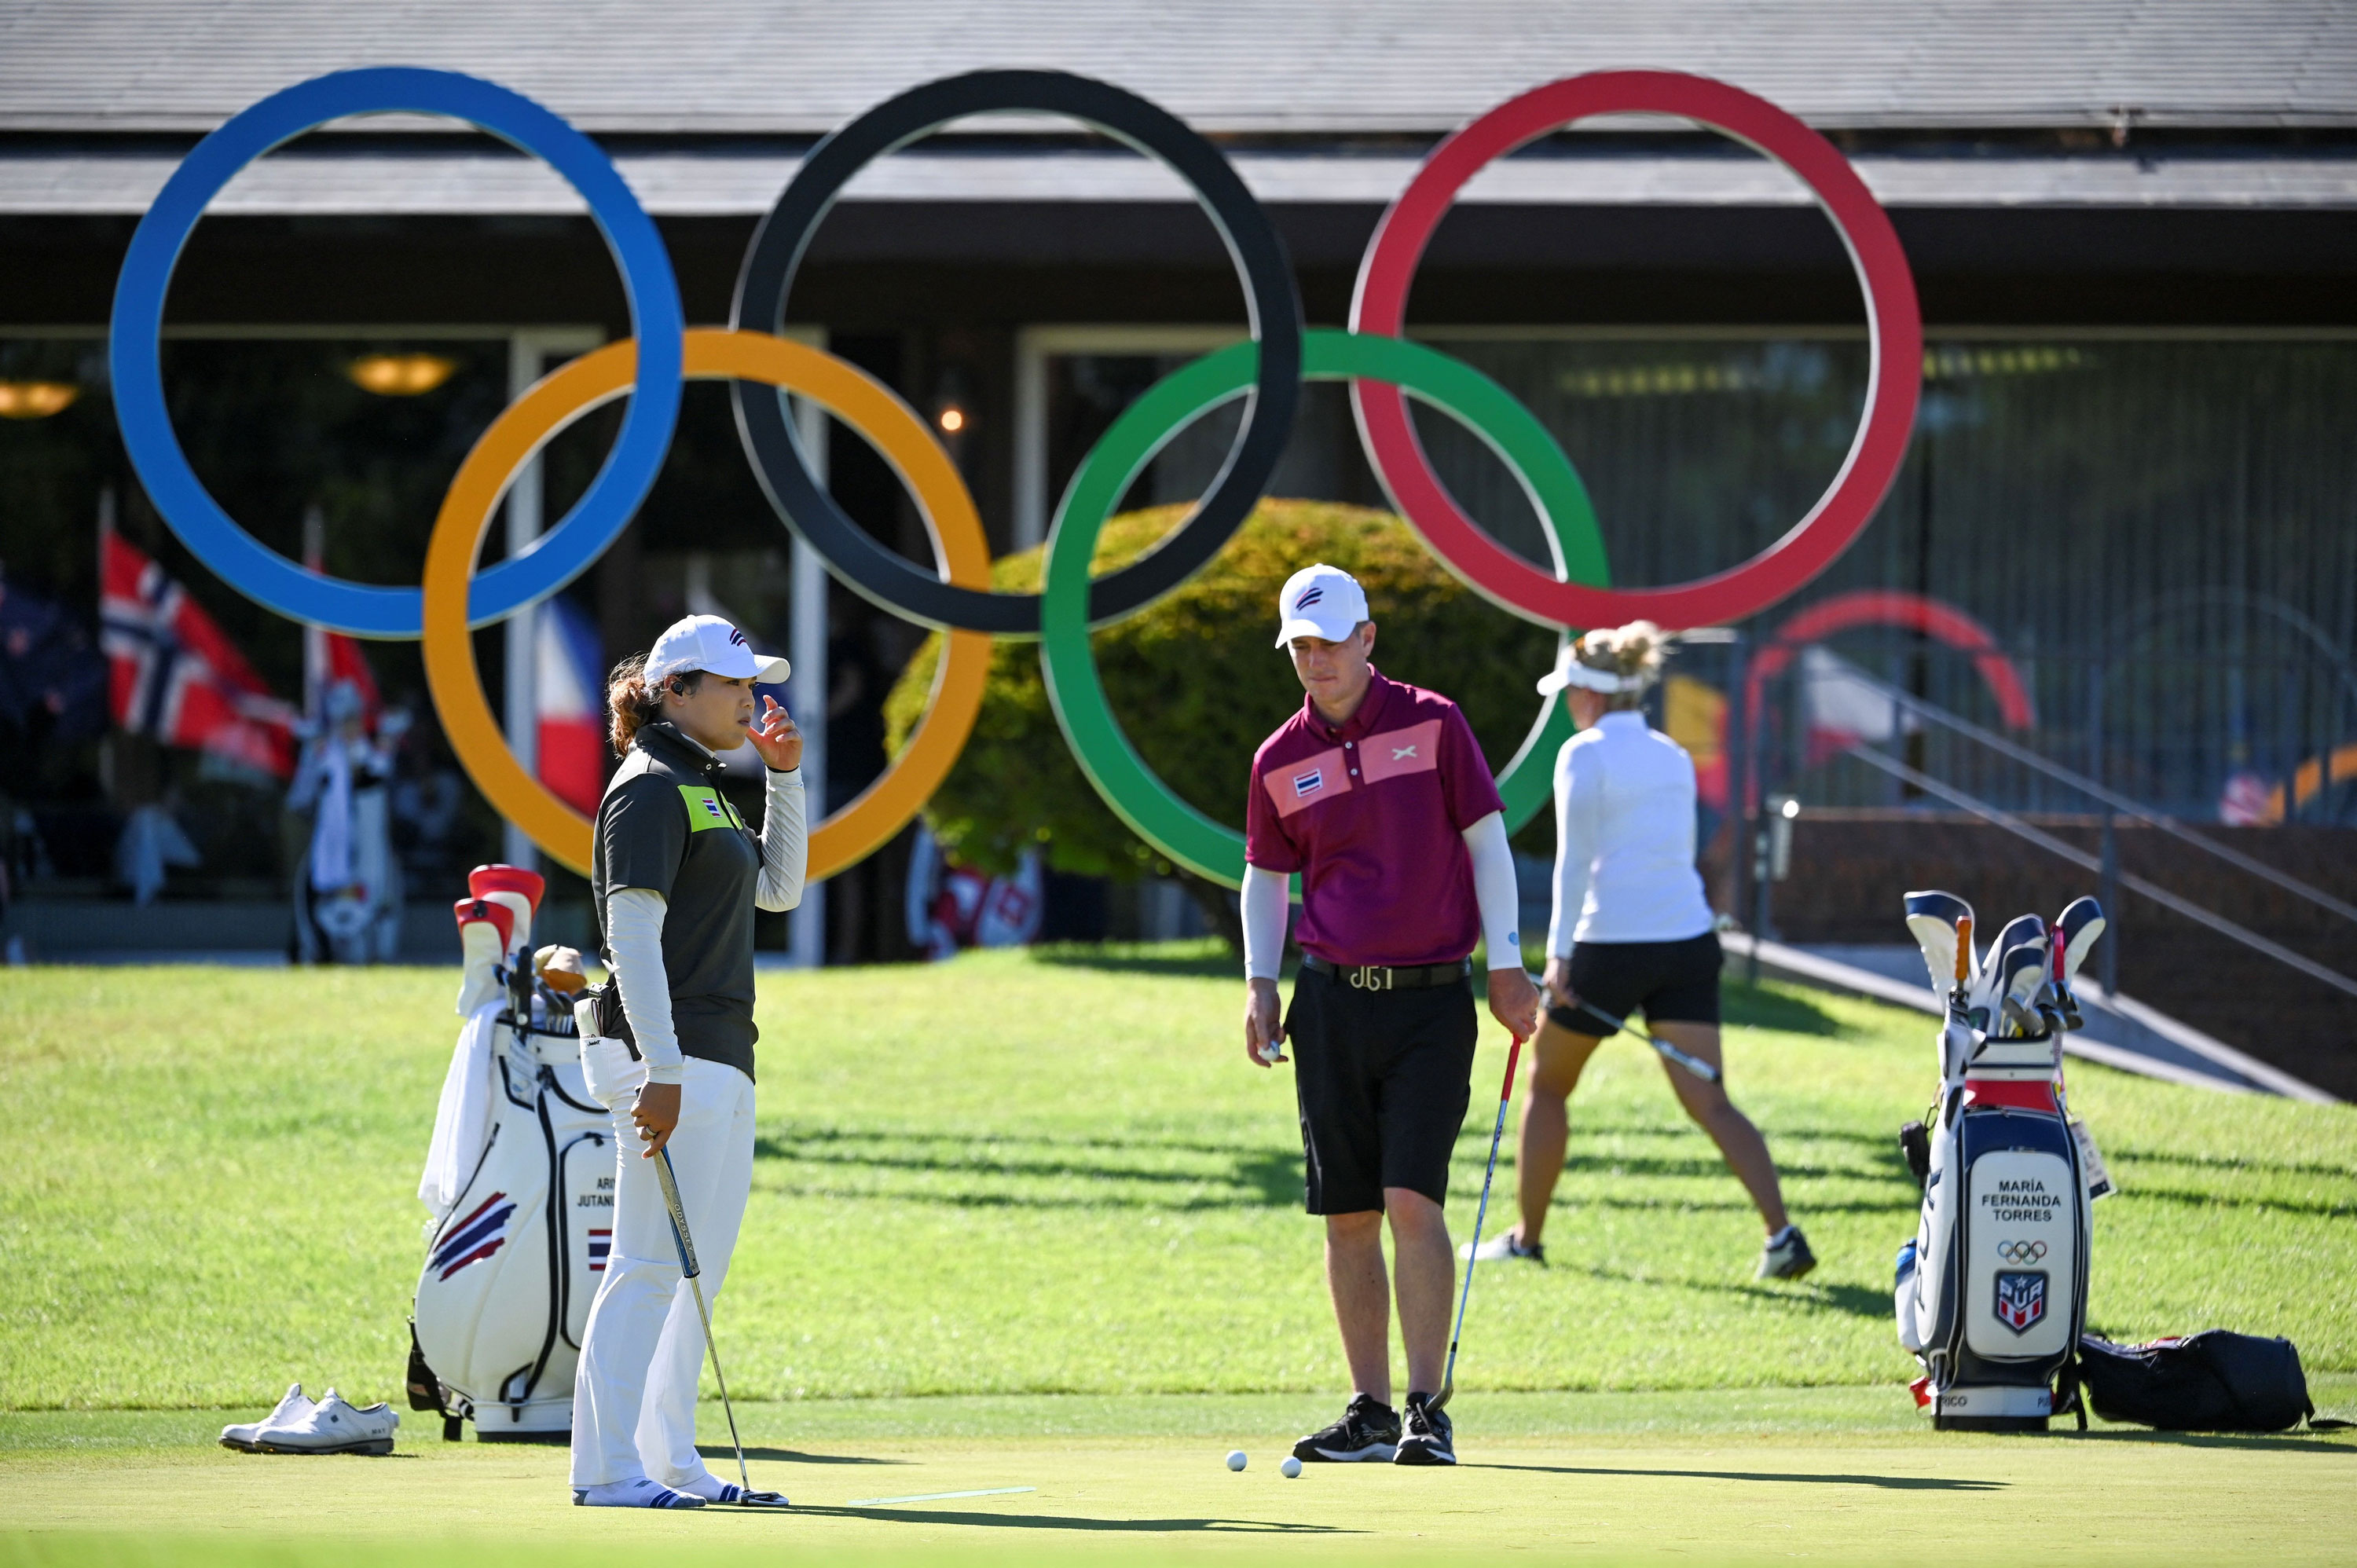 Golf in the Olympics has already been a win for women's golf, LPGA | Golf  News and Tour Information | GolfDigest.com